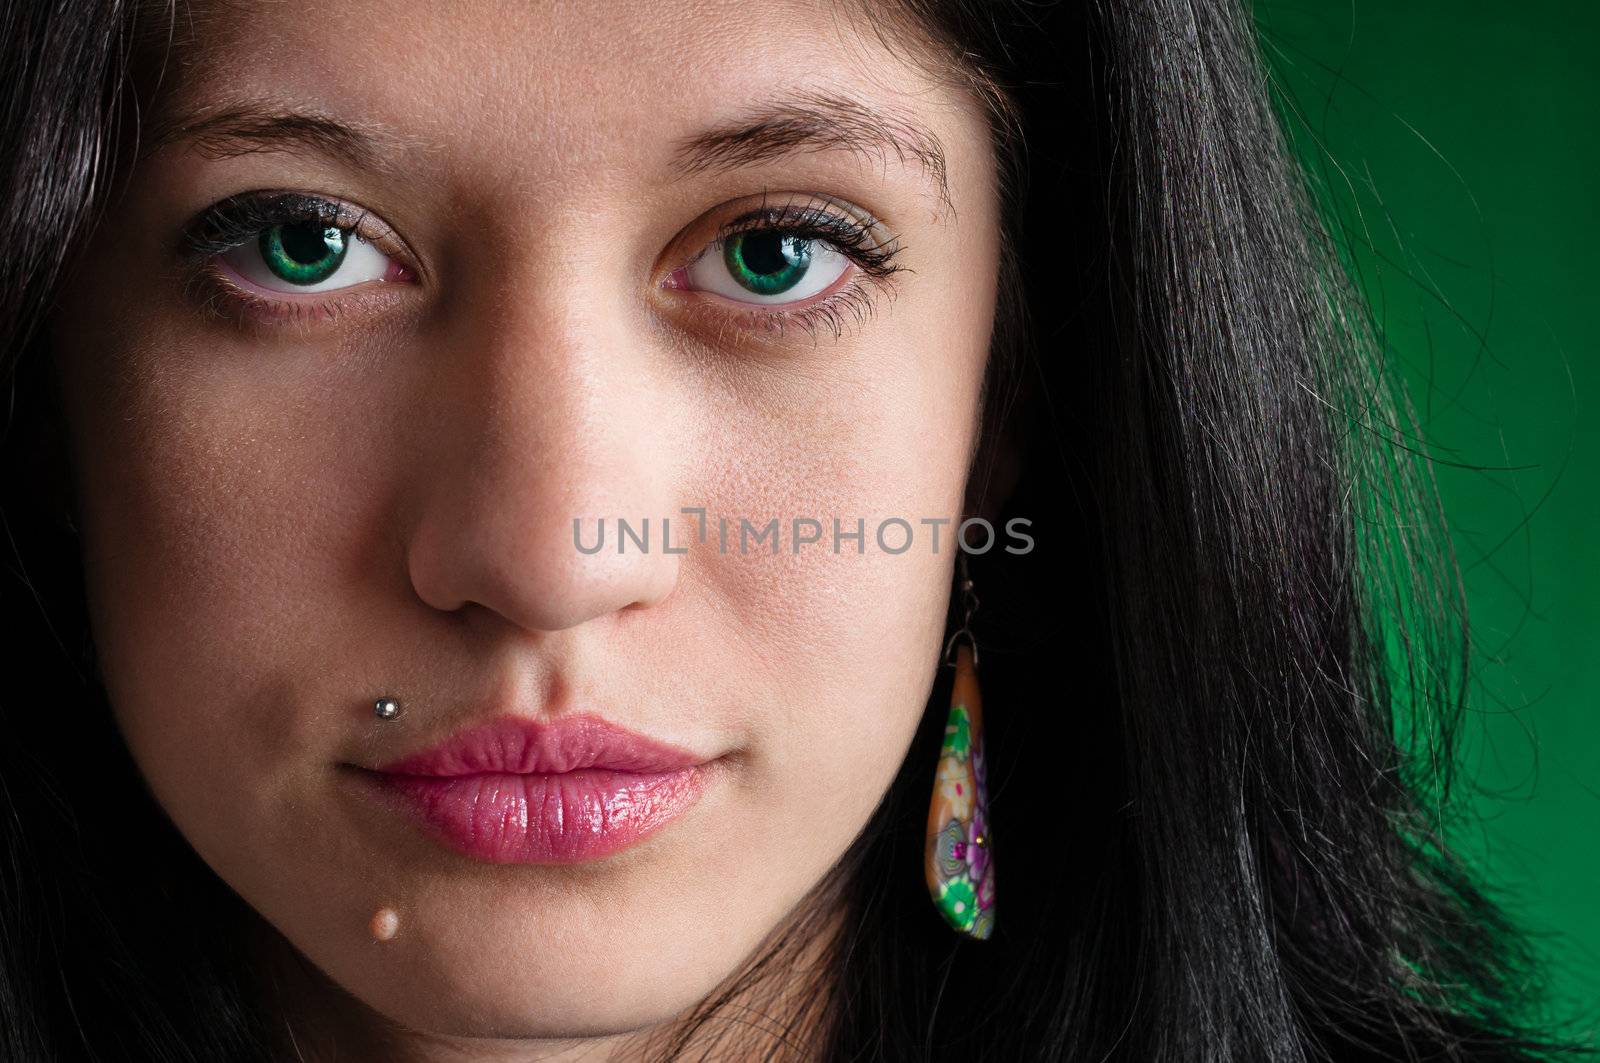 Female face highly detailed close up on green background